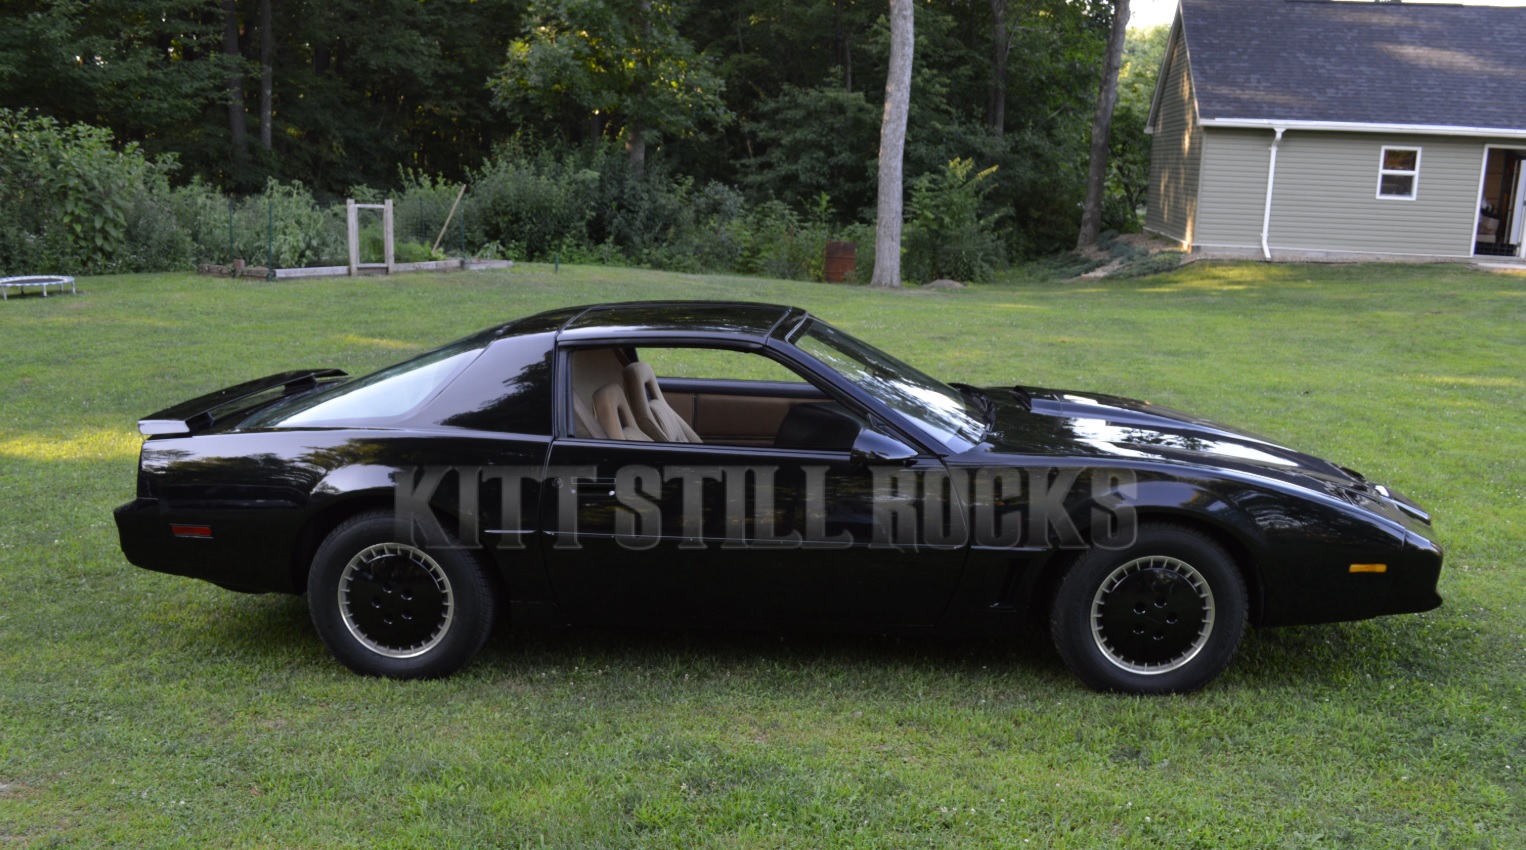 Season Two Knight Rider Replica Build Completed